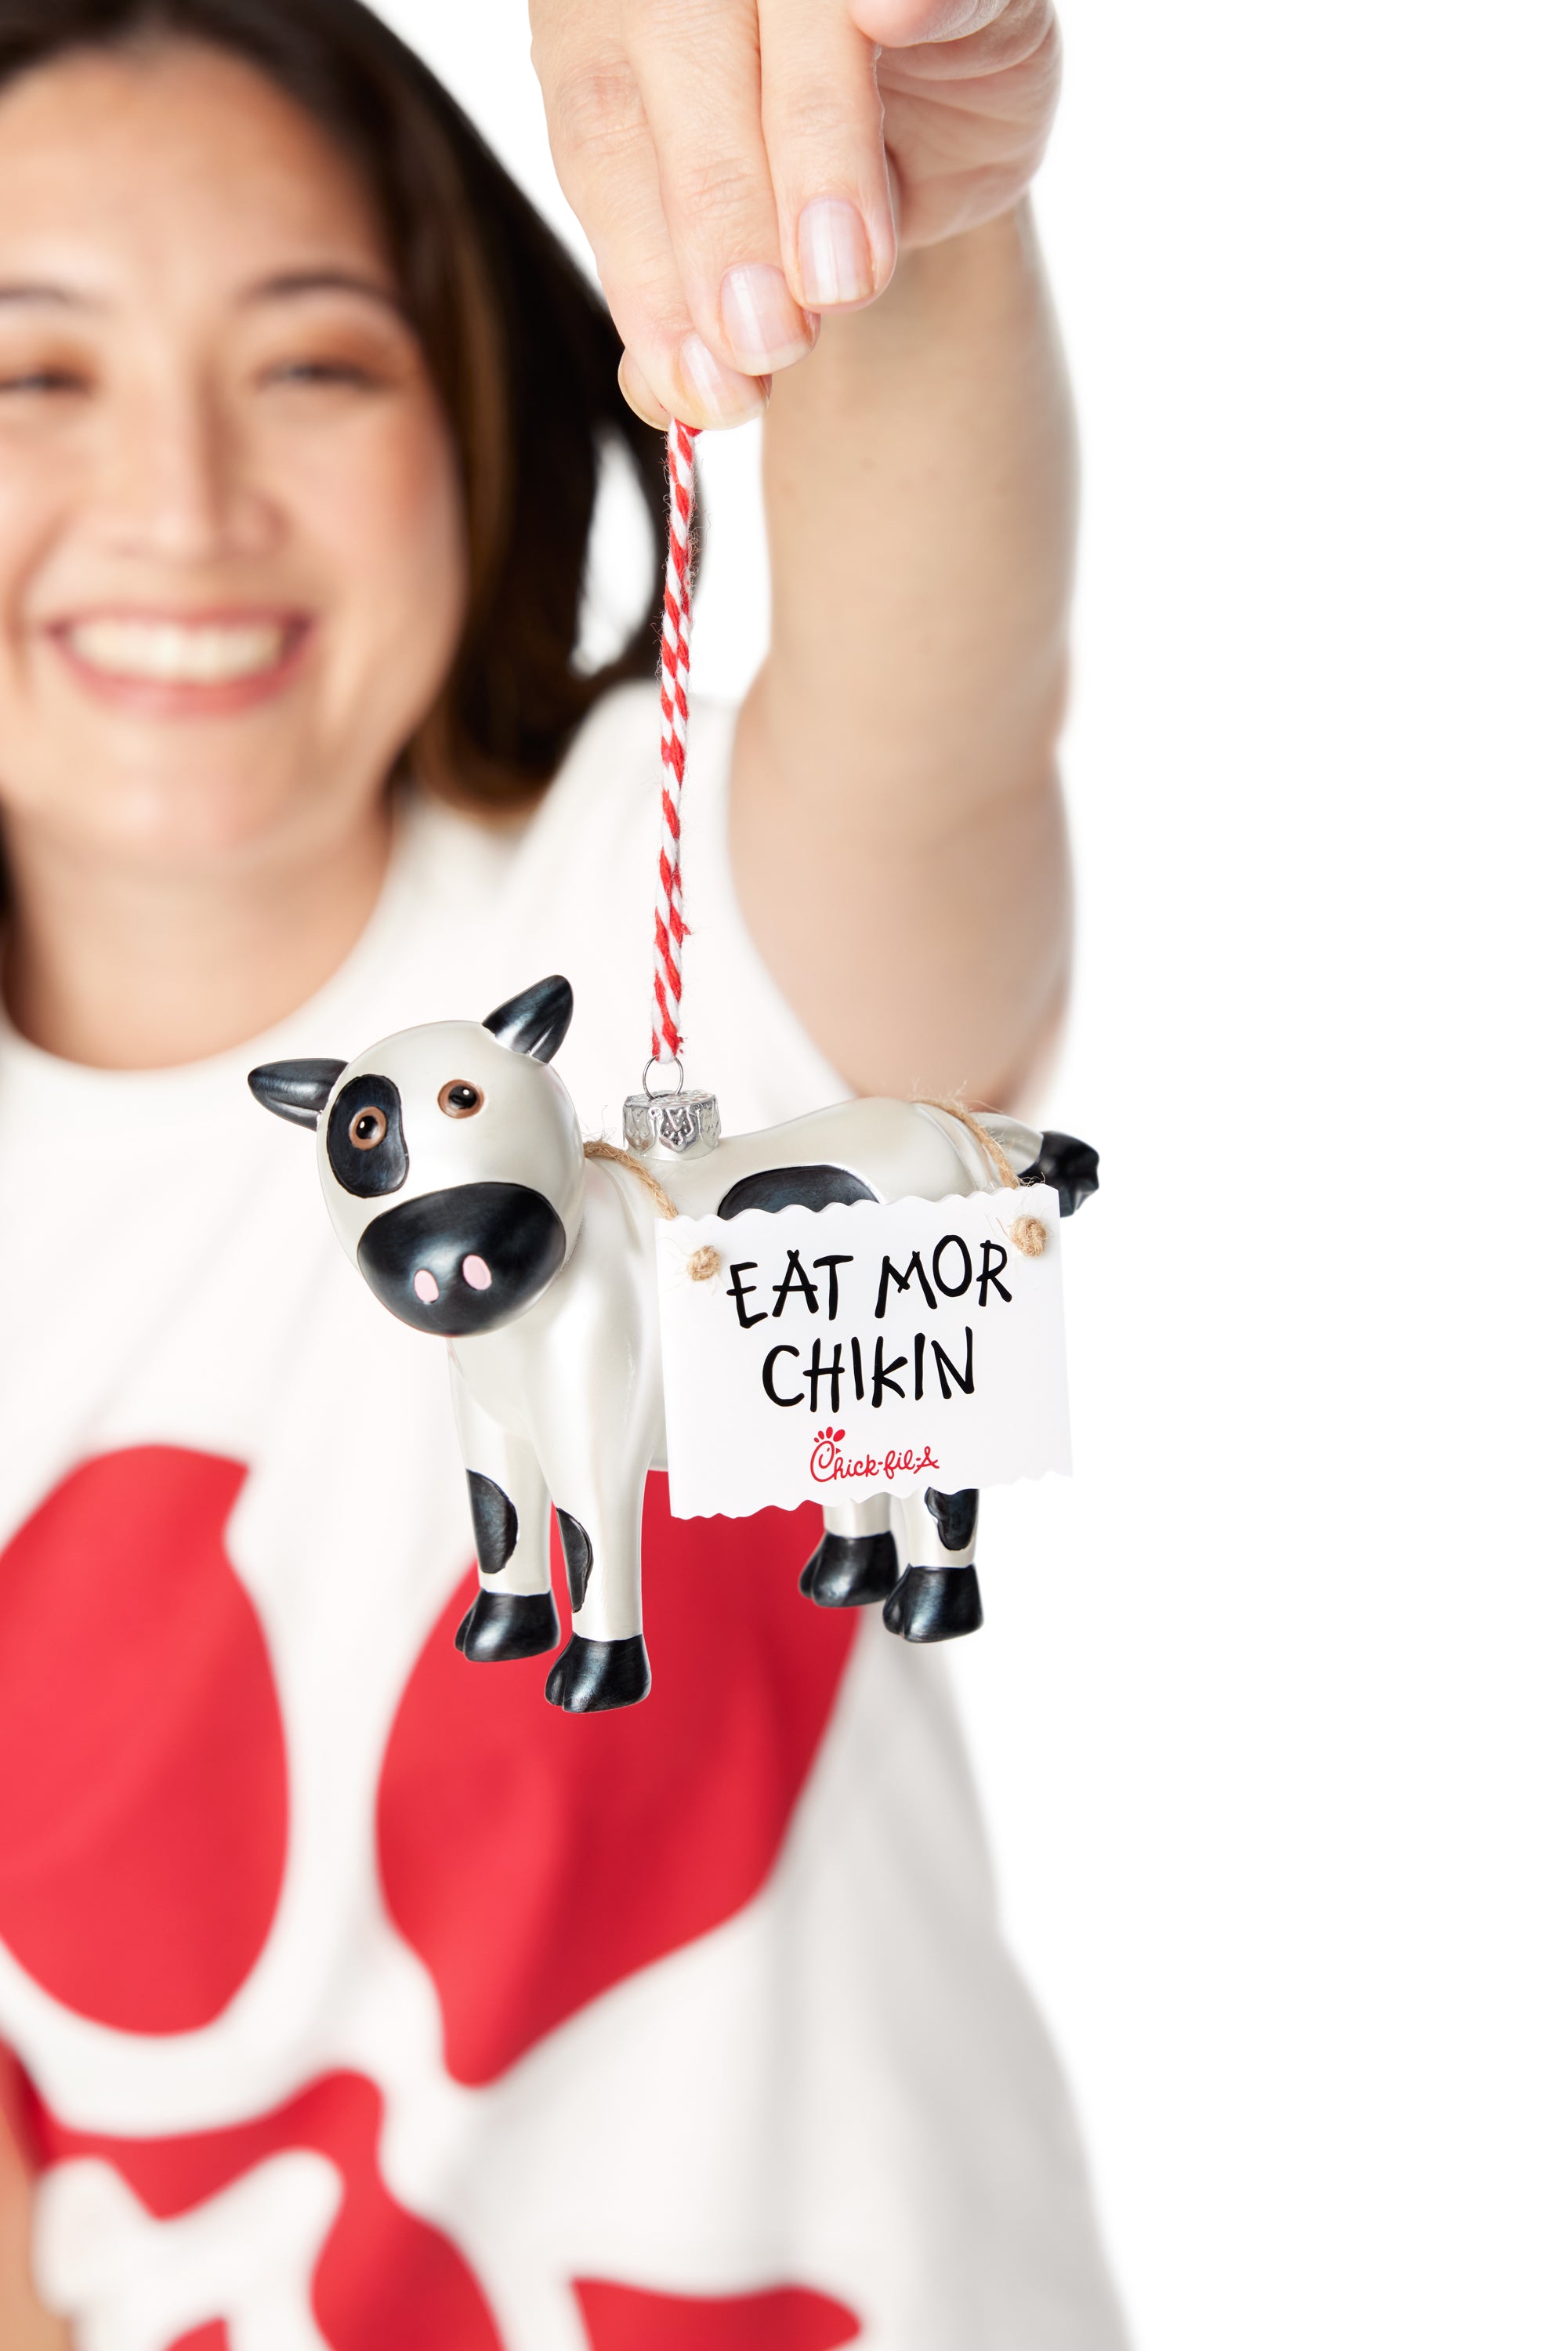 Woman in a Chick-fil-A Logo Print Tee holding a black and white cow ornament wearing a sign that says "EAT MOR CHIKIN"